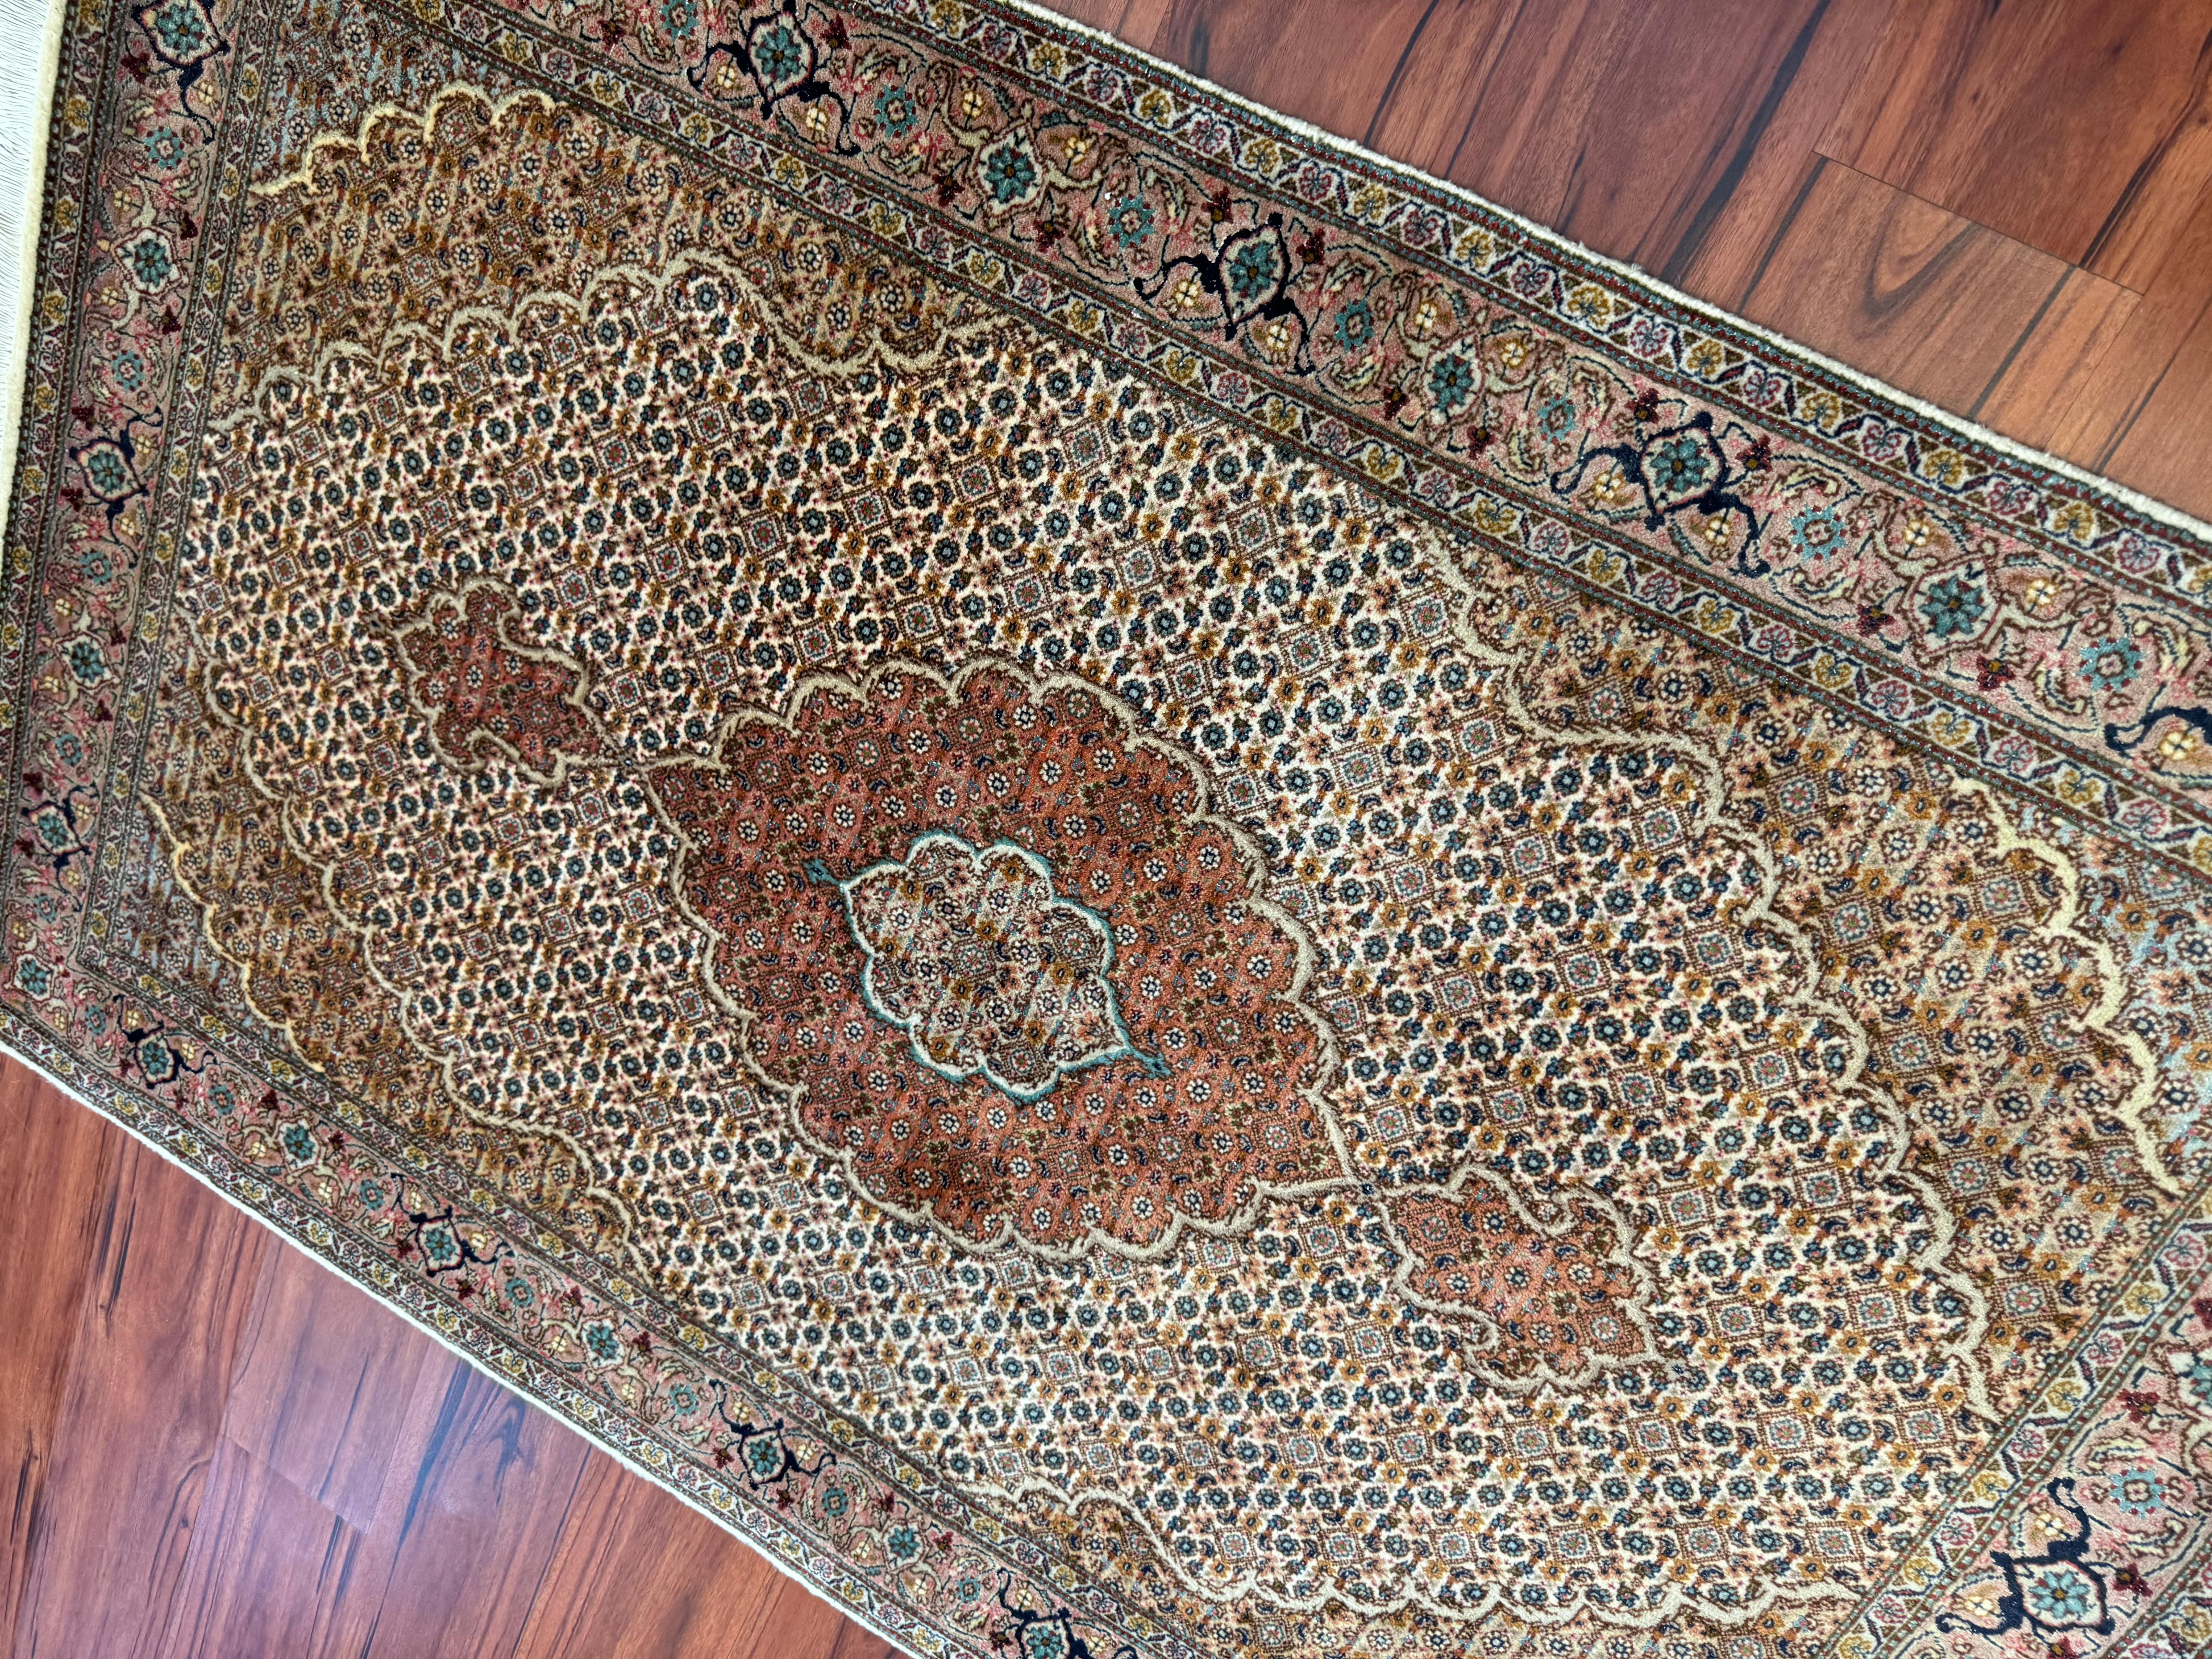 A stunning Vintage Persian Tabriz Mahi Rug that originates from Iran in the mid-20th century. This rug is in excellent condition considering its rich history and is made from a combination of wool, silk, and cotton. A truly gorgeous rug with its